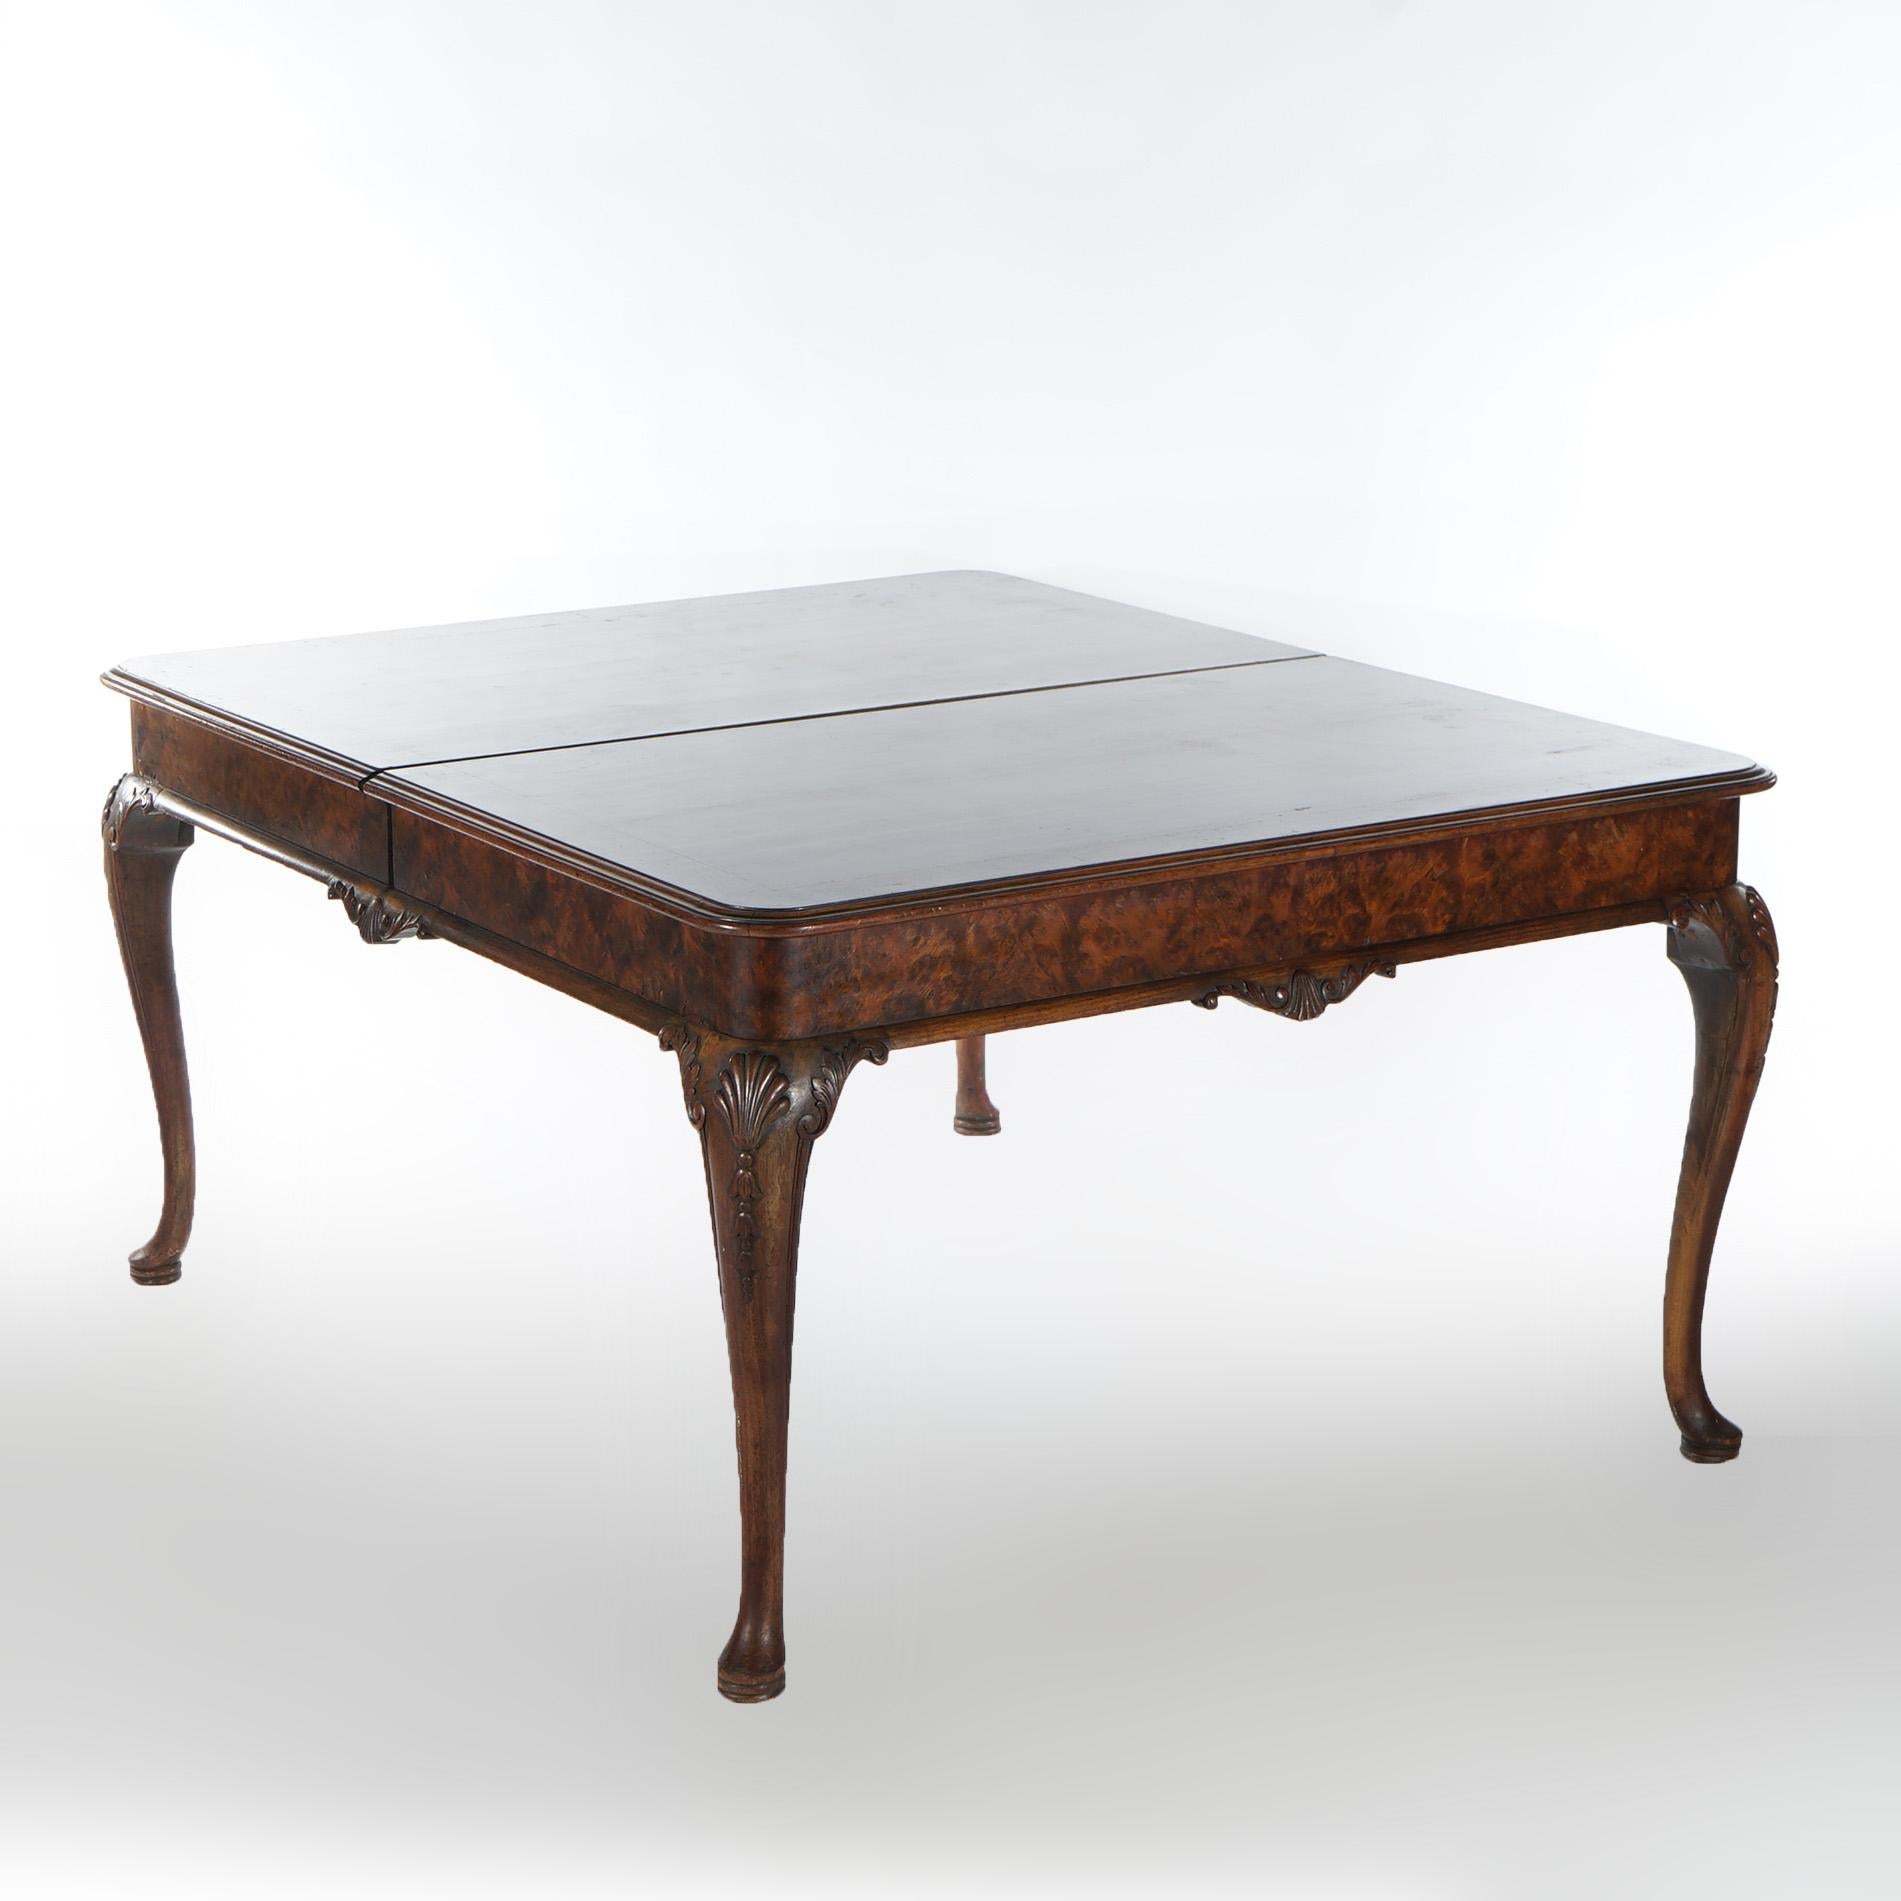 A Queen Anne style extension dining table offers mahogany construction with inlaid banding, shaped skirt and raised on cabriole legs terminating in pad feet; includes and accepts two skirted leaves, c1930

Measures - 30